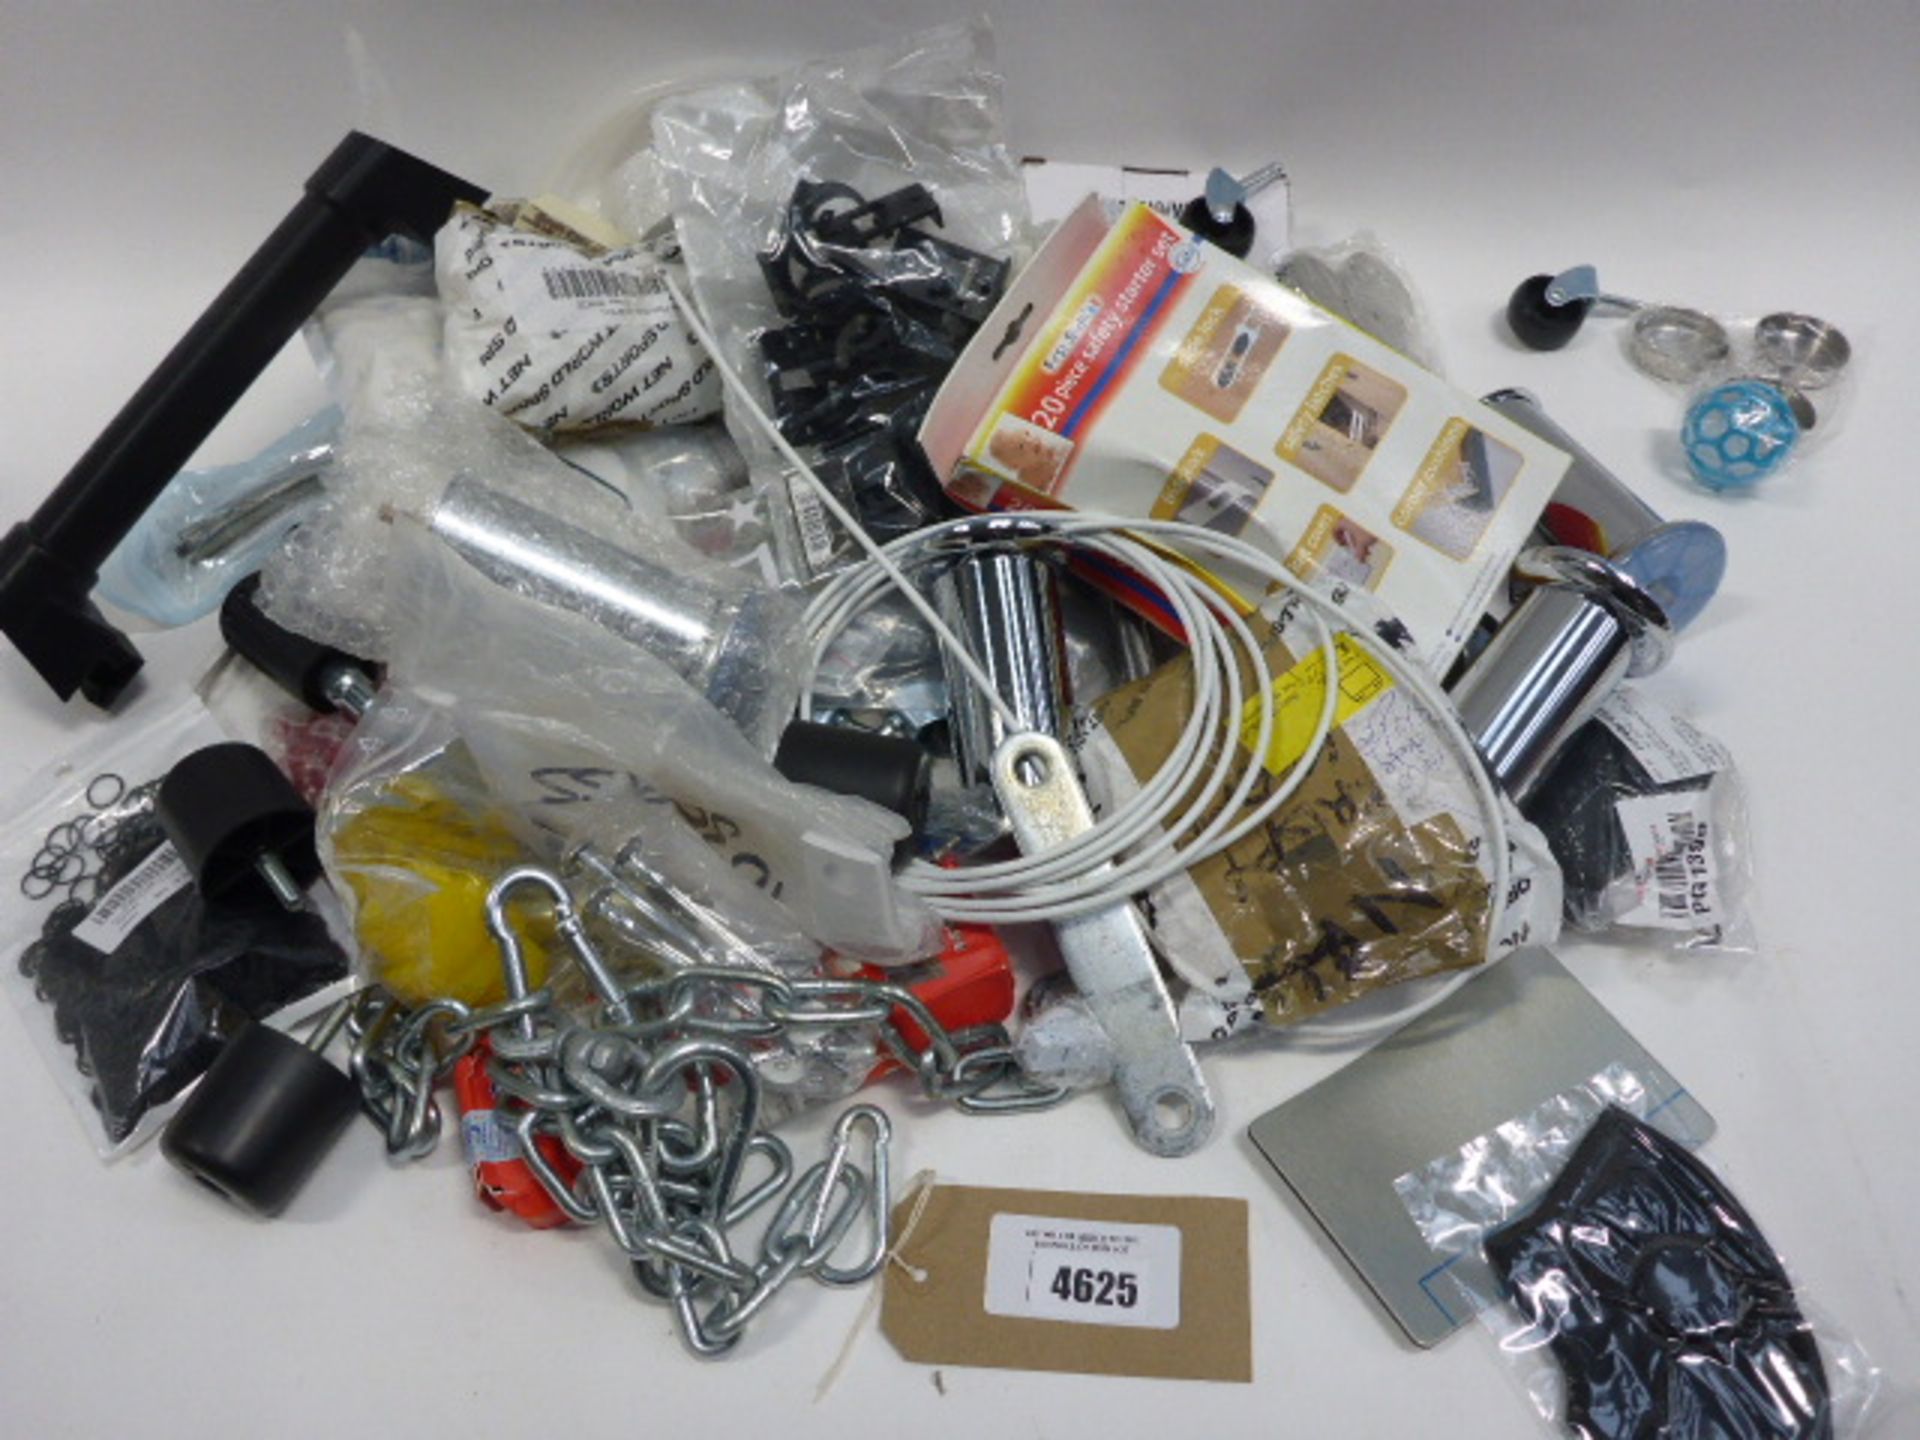 Bag containing furniture feet, first step safety starter sets, O-rings, castors, clips, and